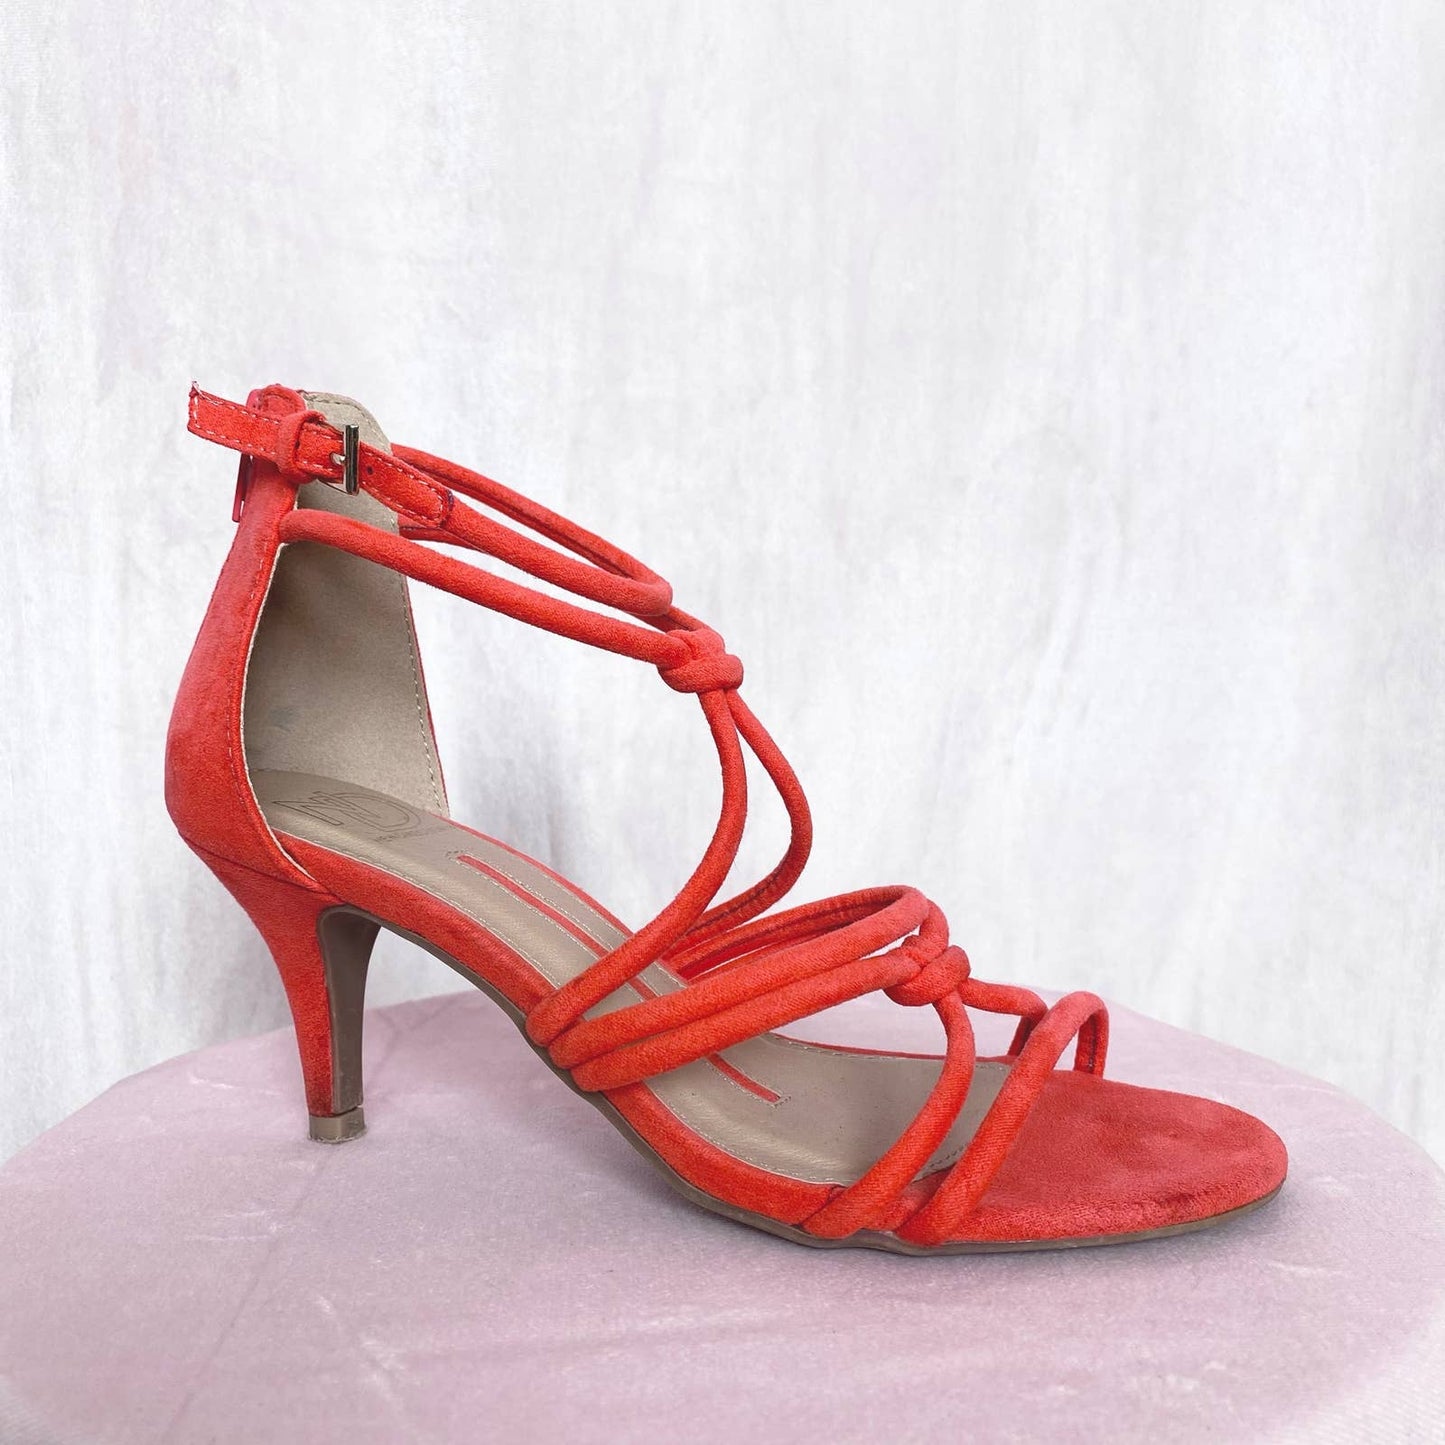 Secondhand New Directions Coral Suede Strappy Sandal Heels, Size 6